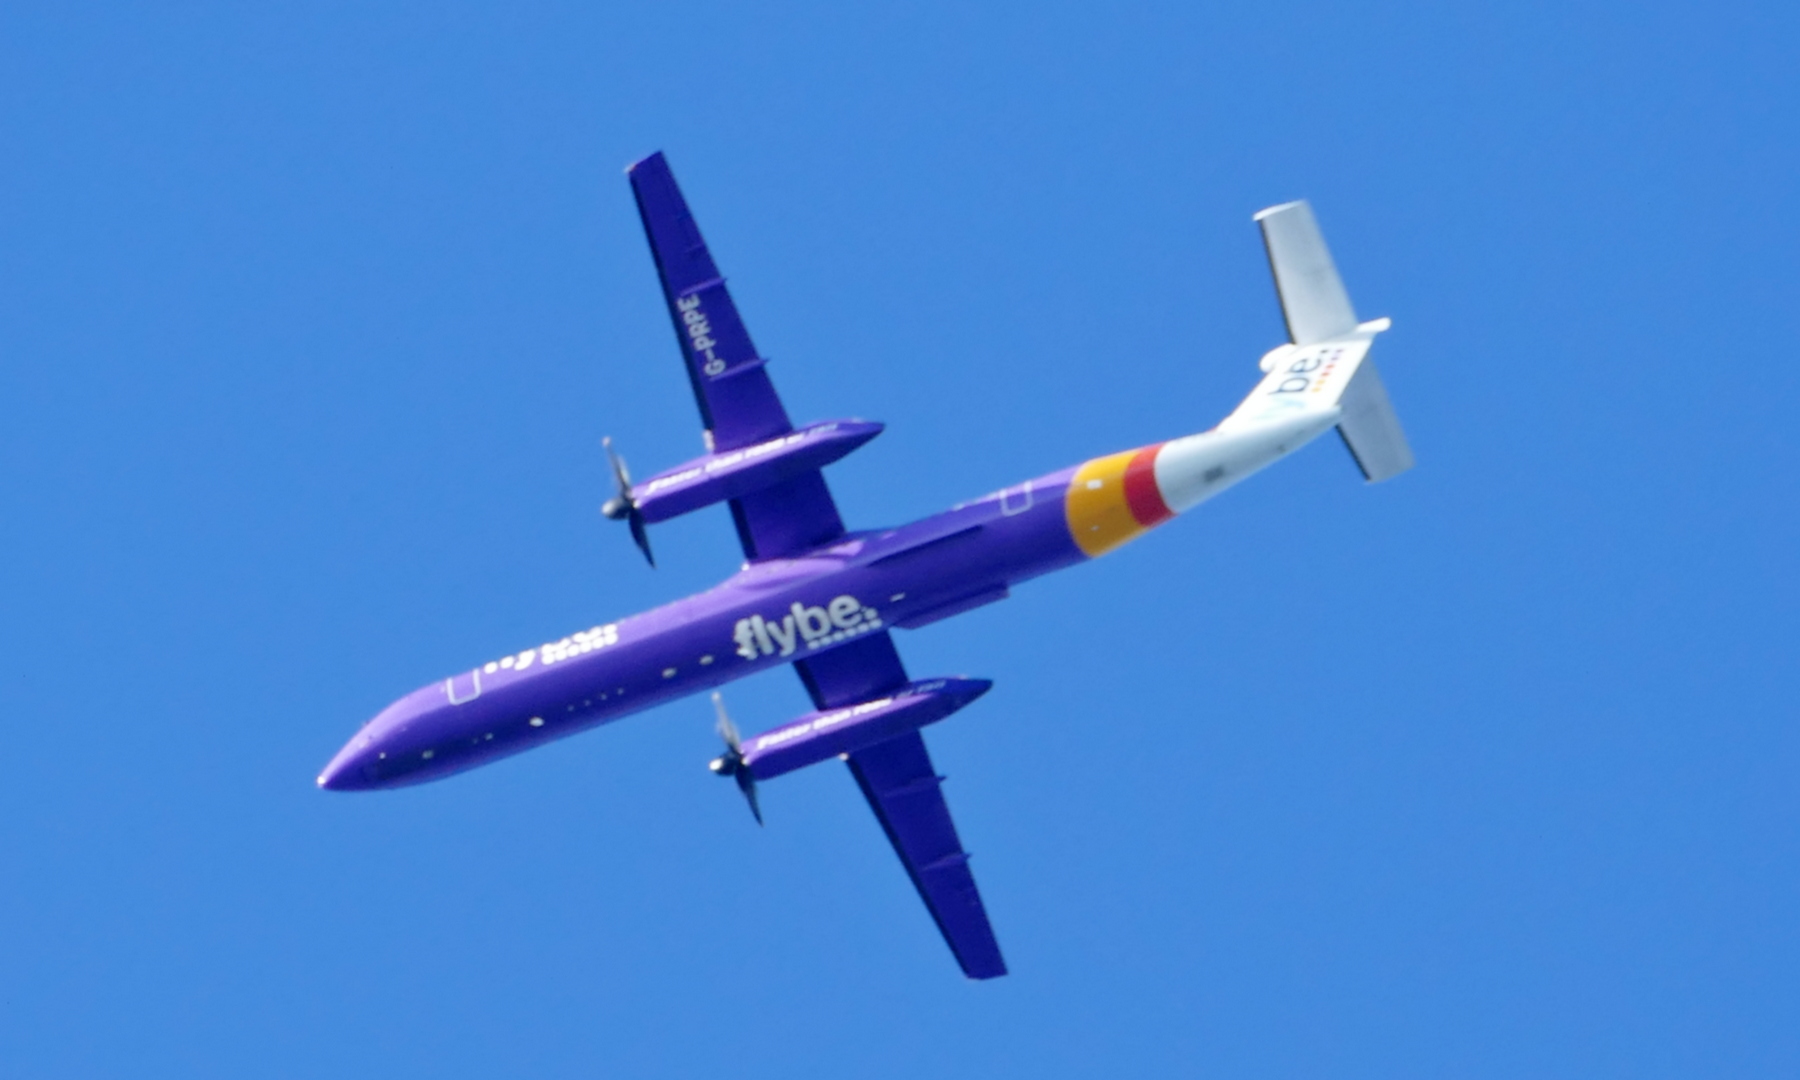 FlyBe DHC-8-400